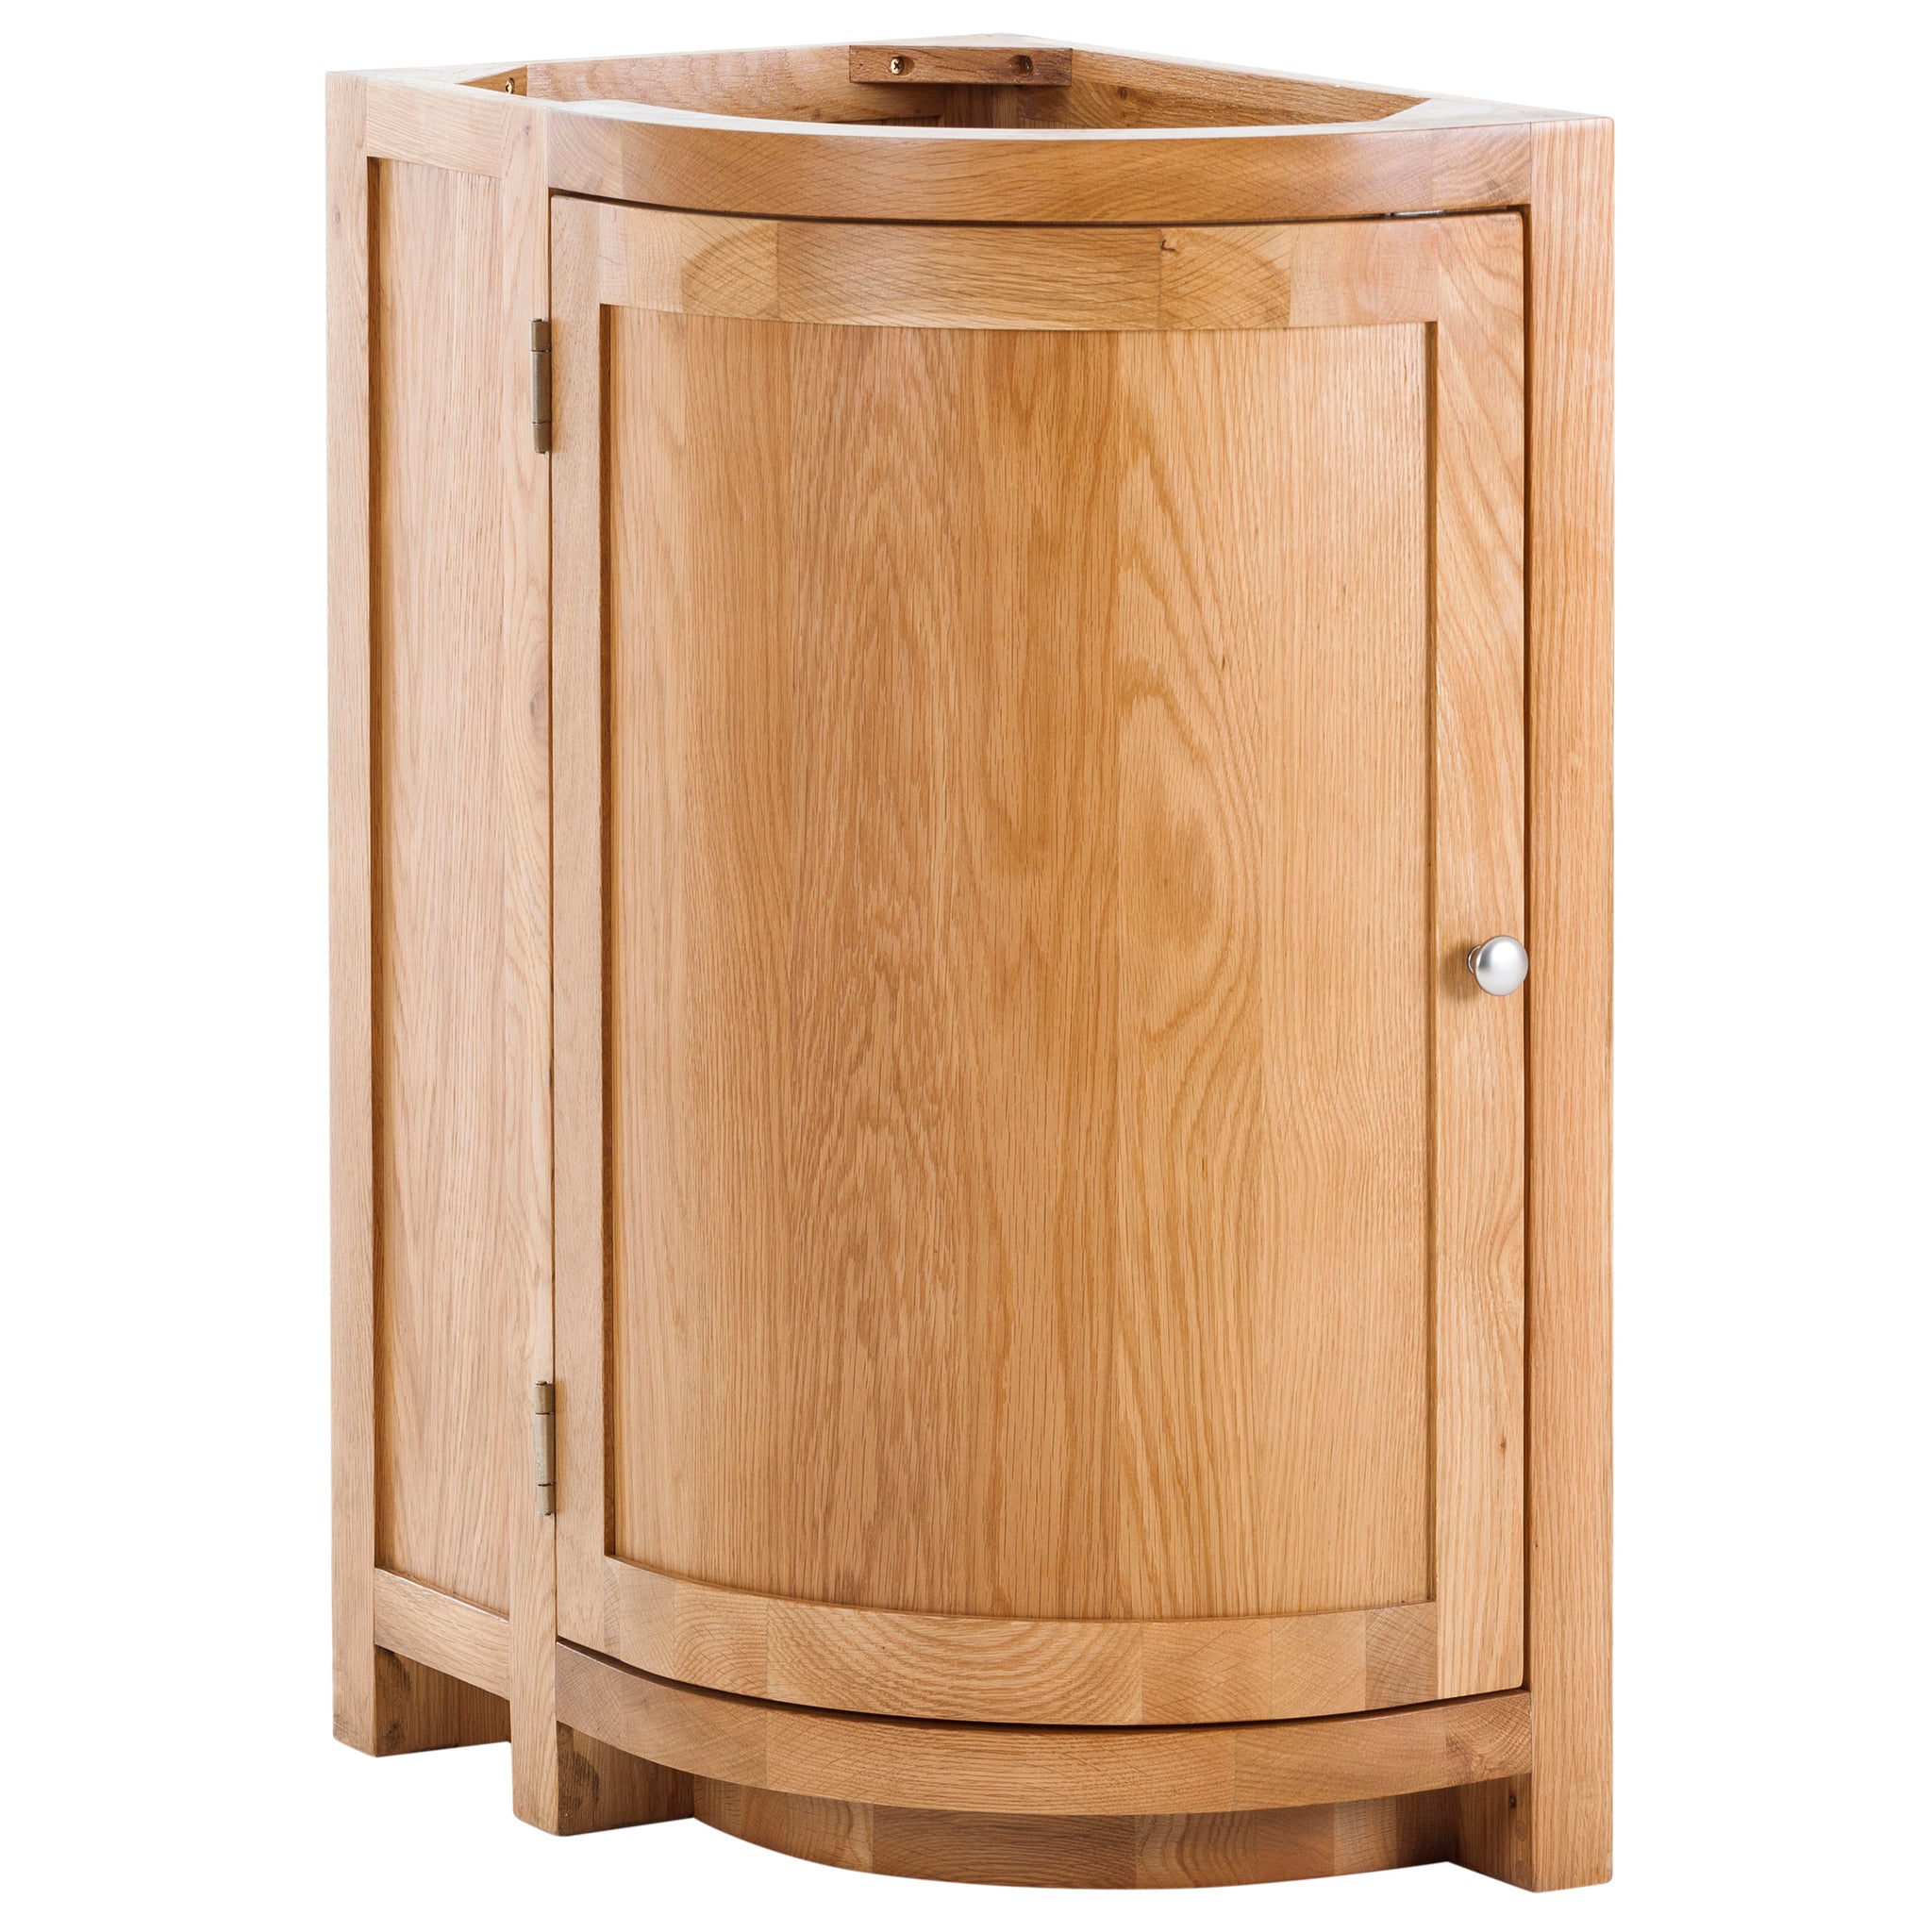 Oak Curved End Cabinet (Hinges on the LHS)